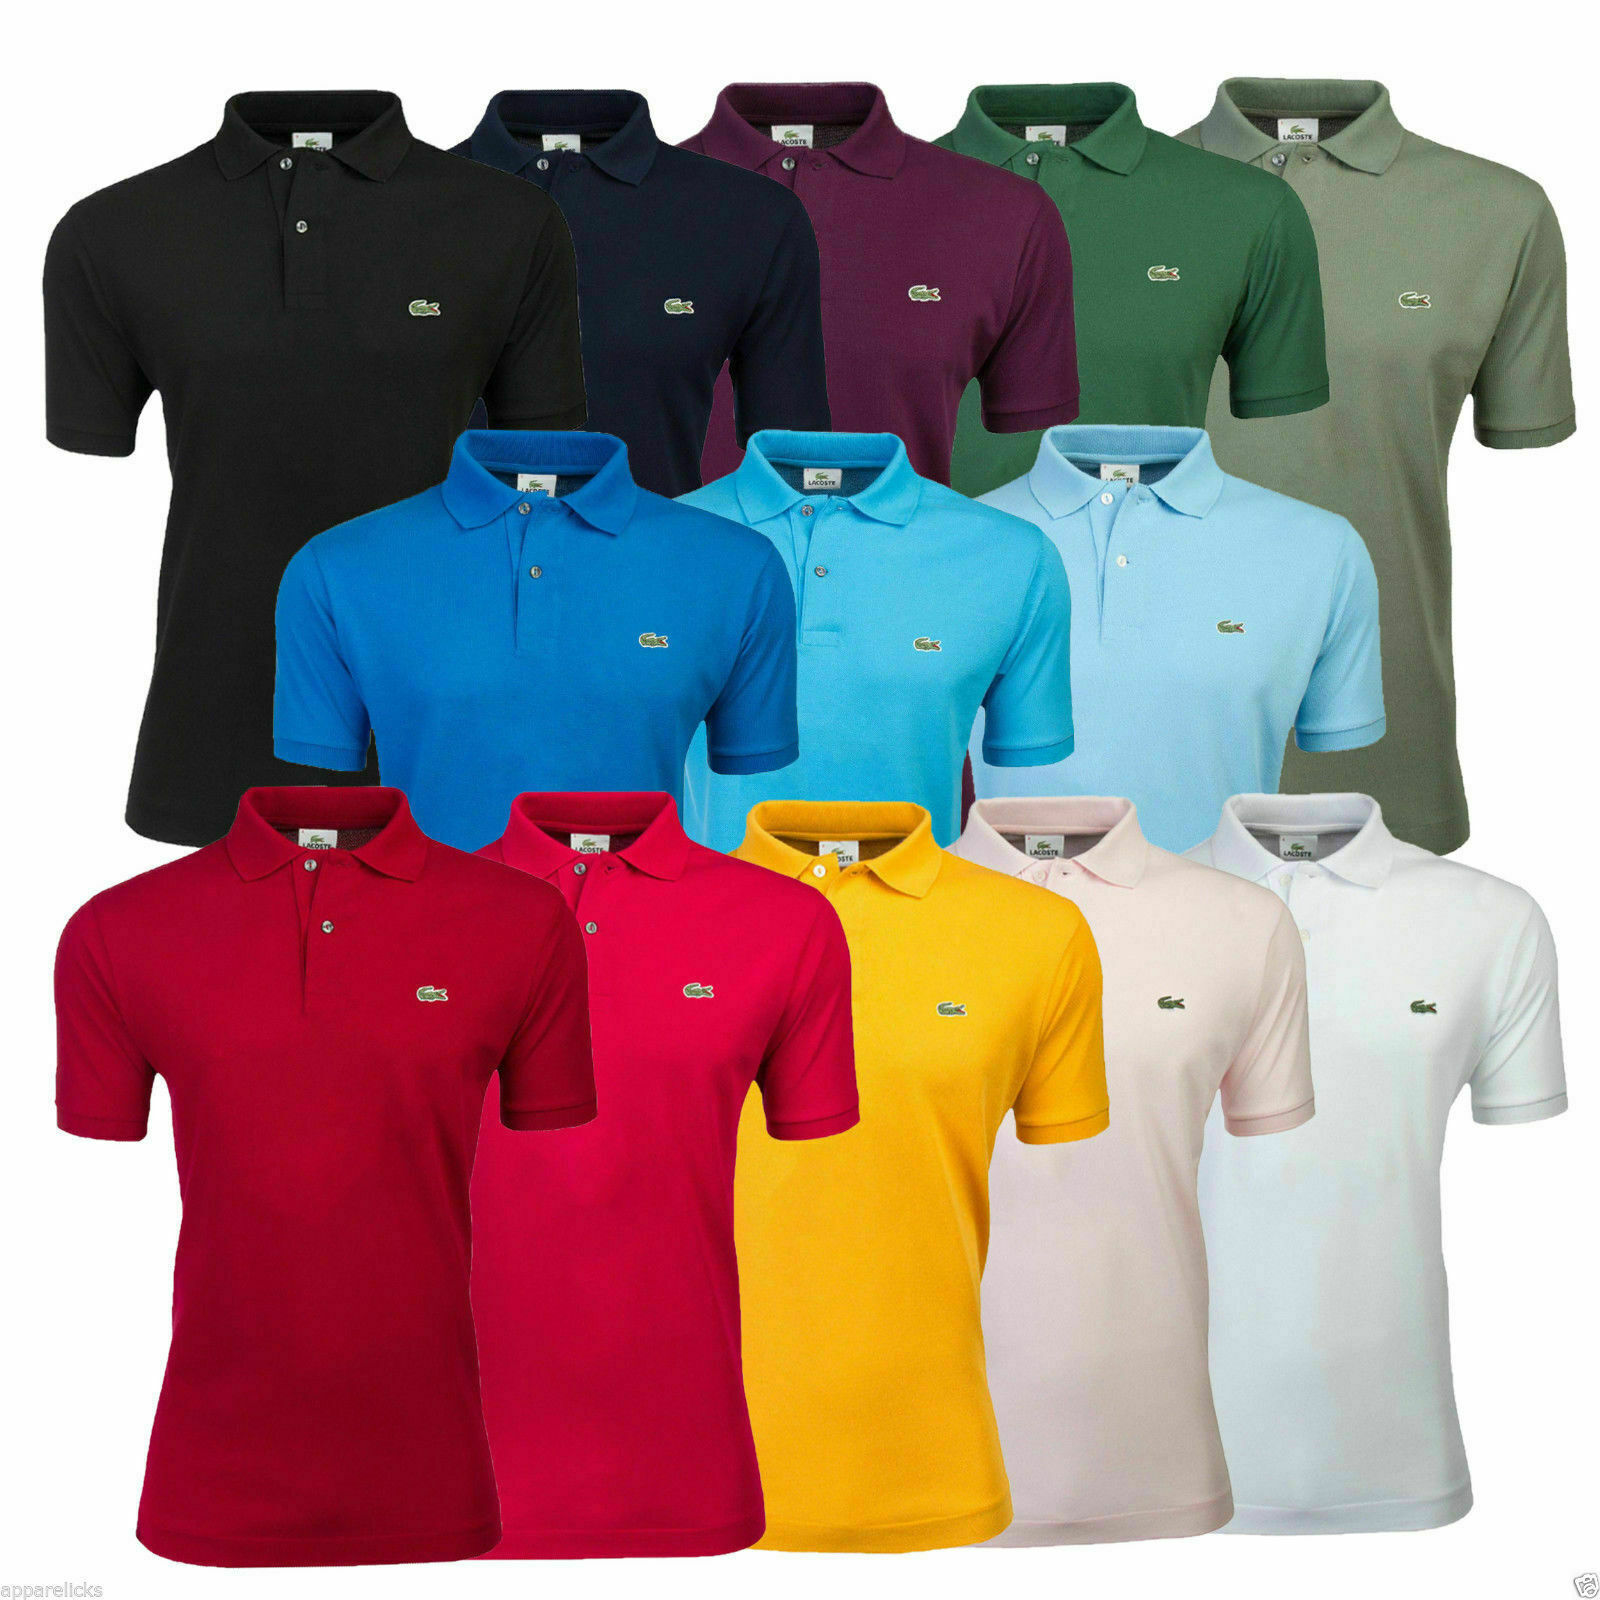 POLO LACOSTE 1212 CLASSIC FIT & SLIM FIT SHORT SLEEVE -30% SUPER PROMO |